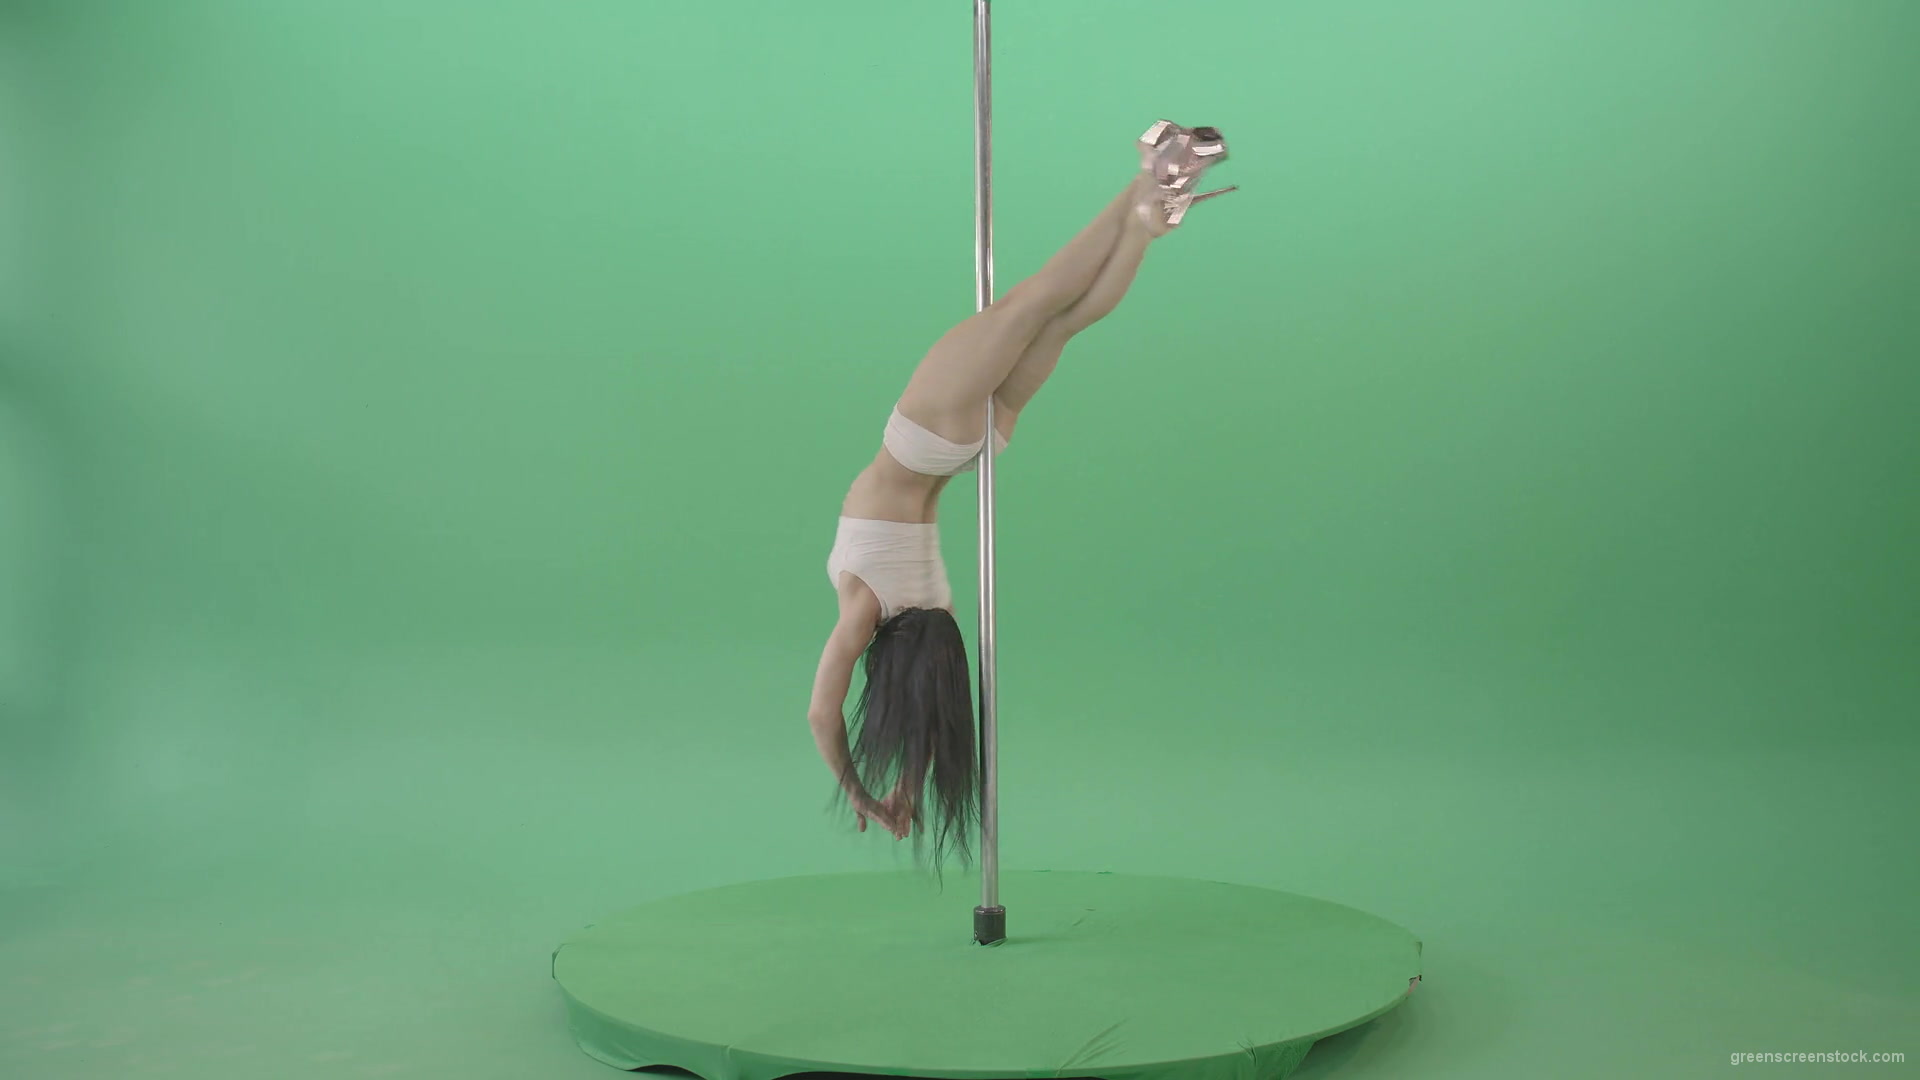 White-dressed-Girl-spinning-down-head-on-pole-dance-on-green-screen-4K-Video-Footage-1920_009 Green Screen Stock